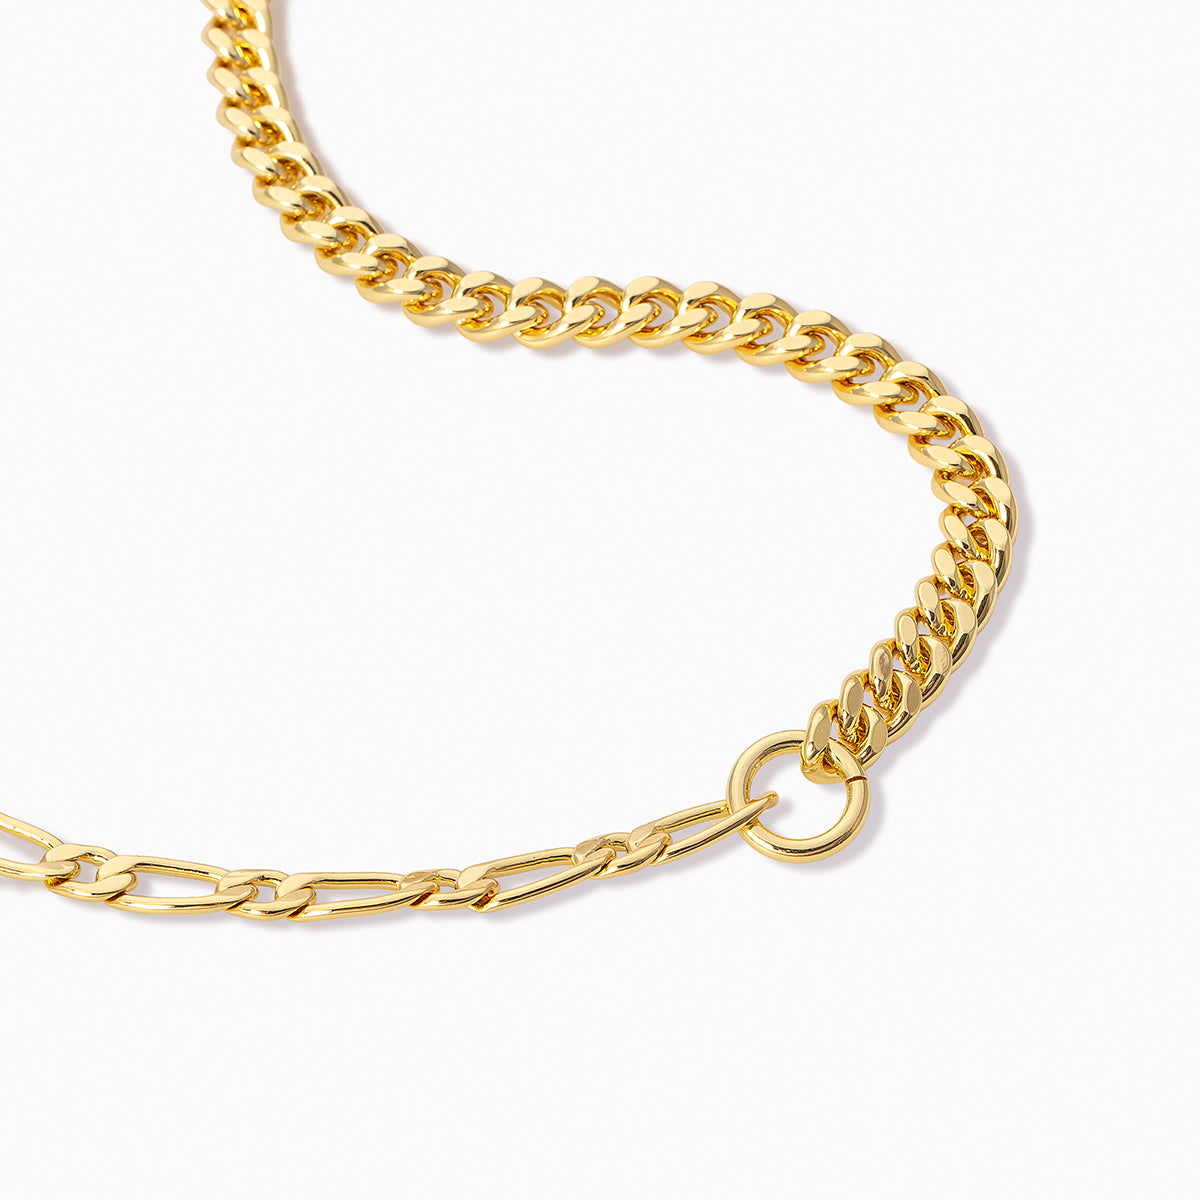 Breadwinner Chain Necklace | Gold | Product Detail Image | Uncommon James